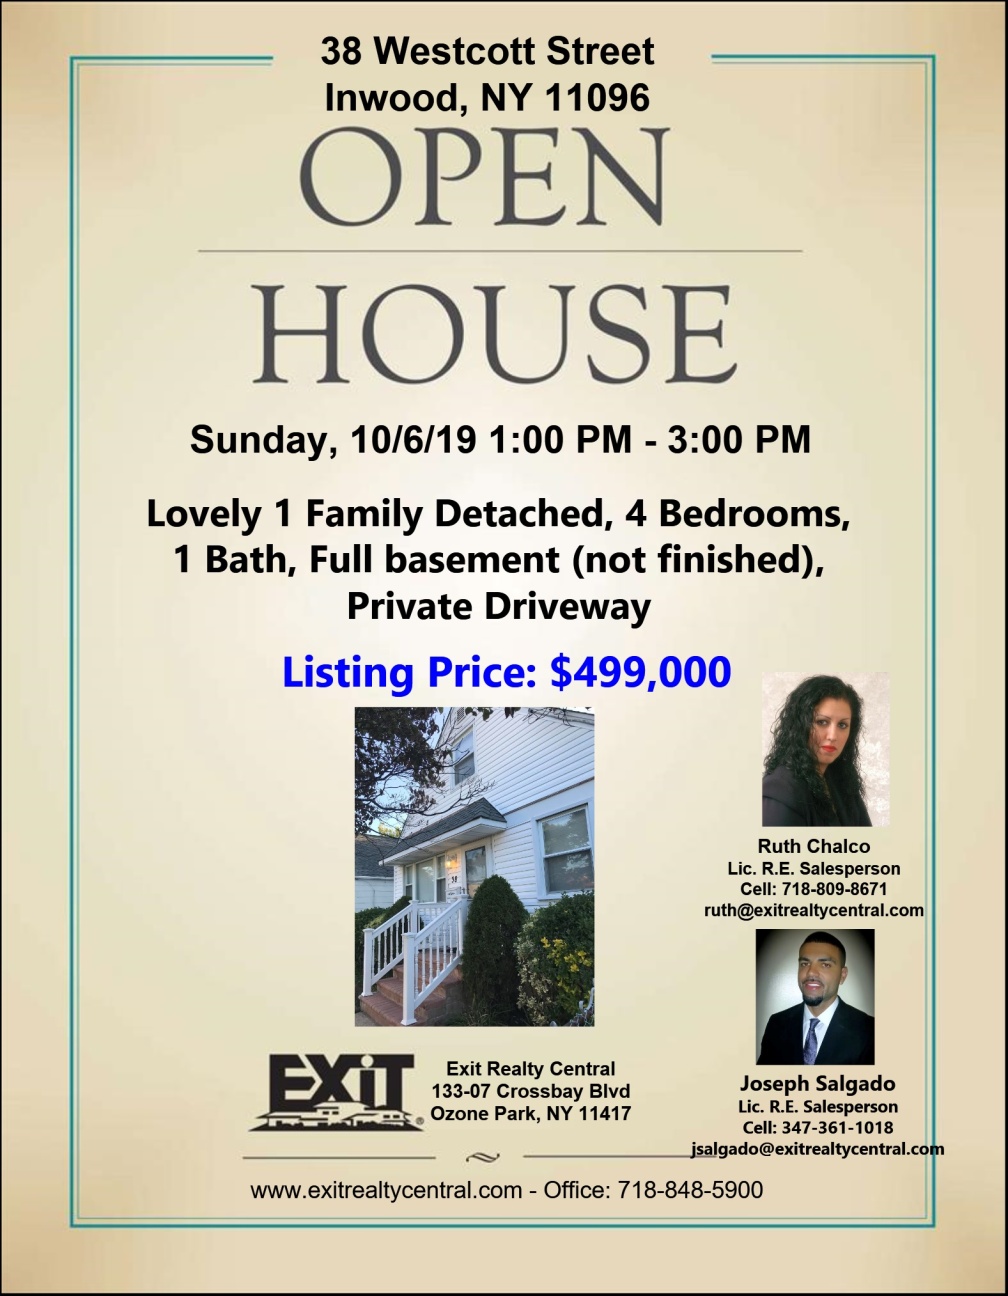 Open House in Inwood 10/6/19 1-3pm